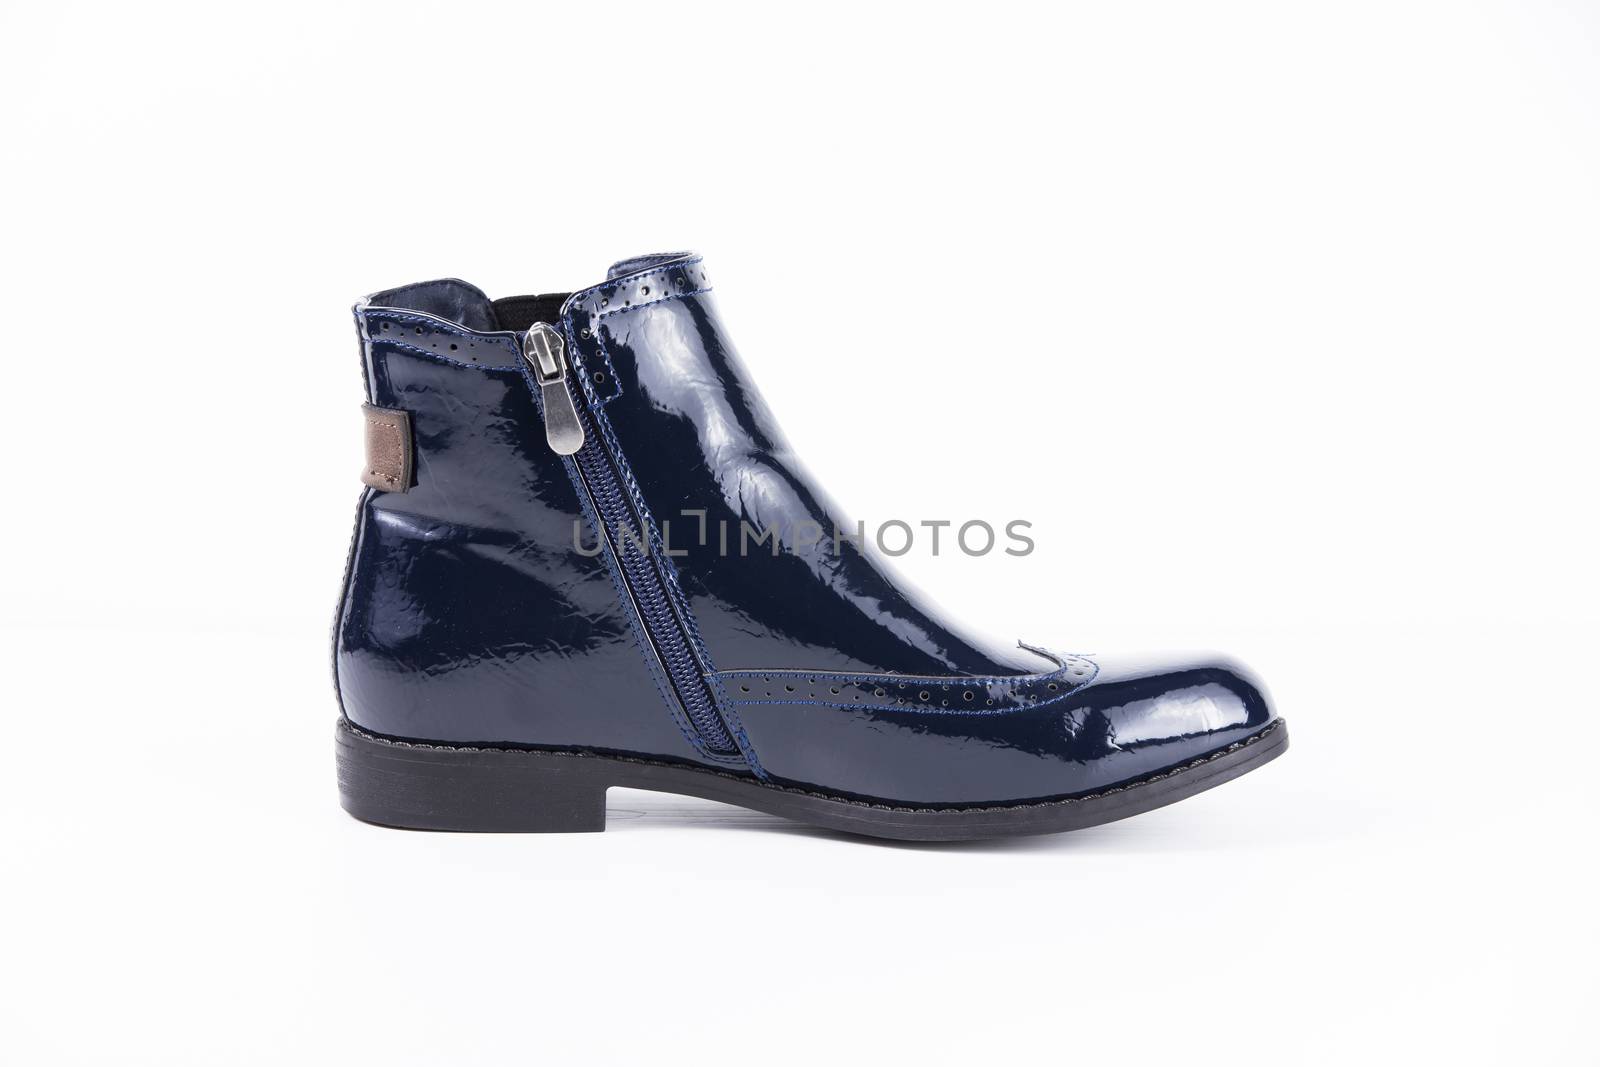 Female blue leather boots on white background, isolated product.